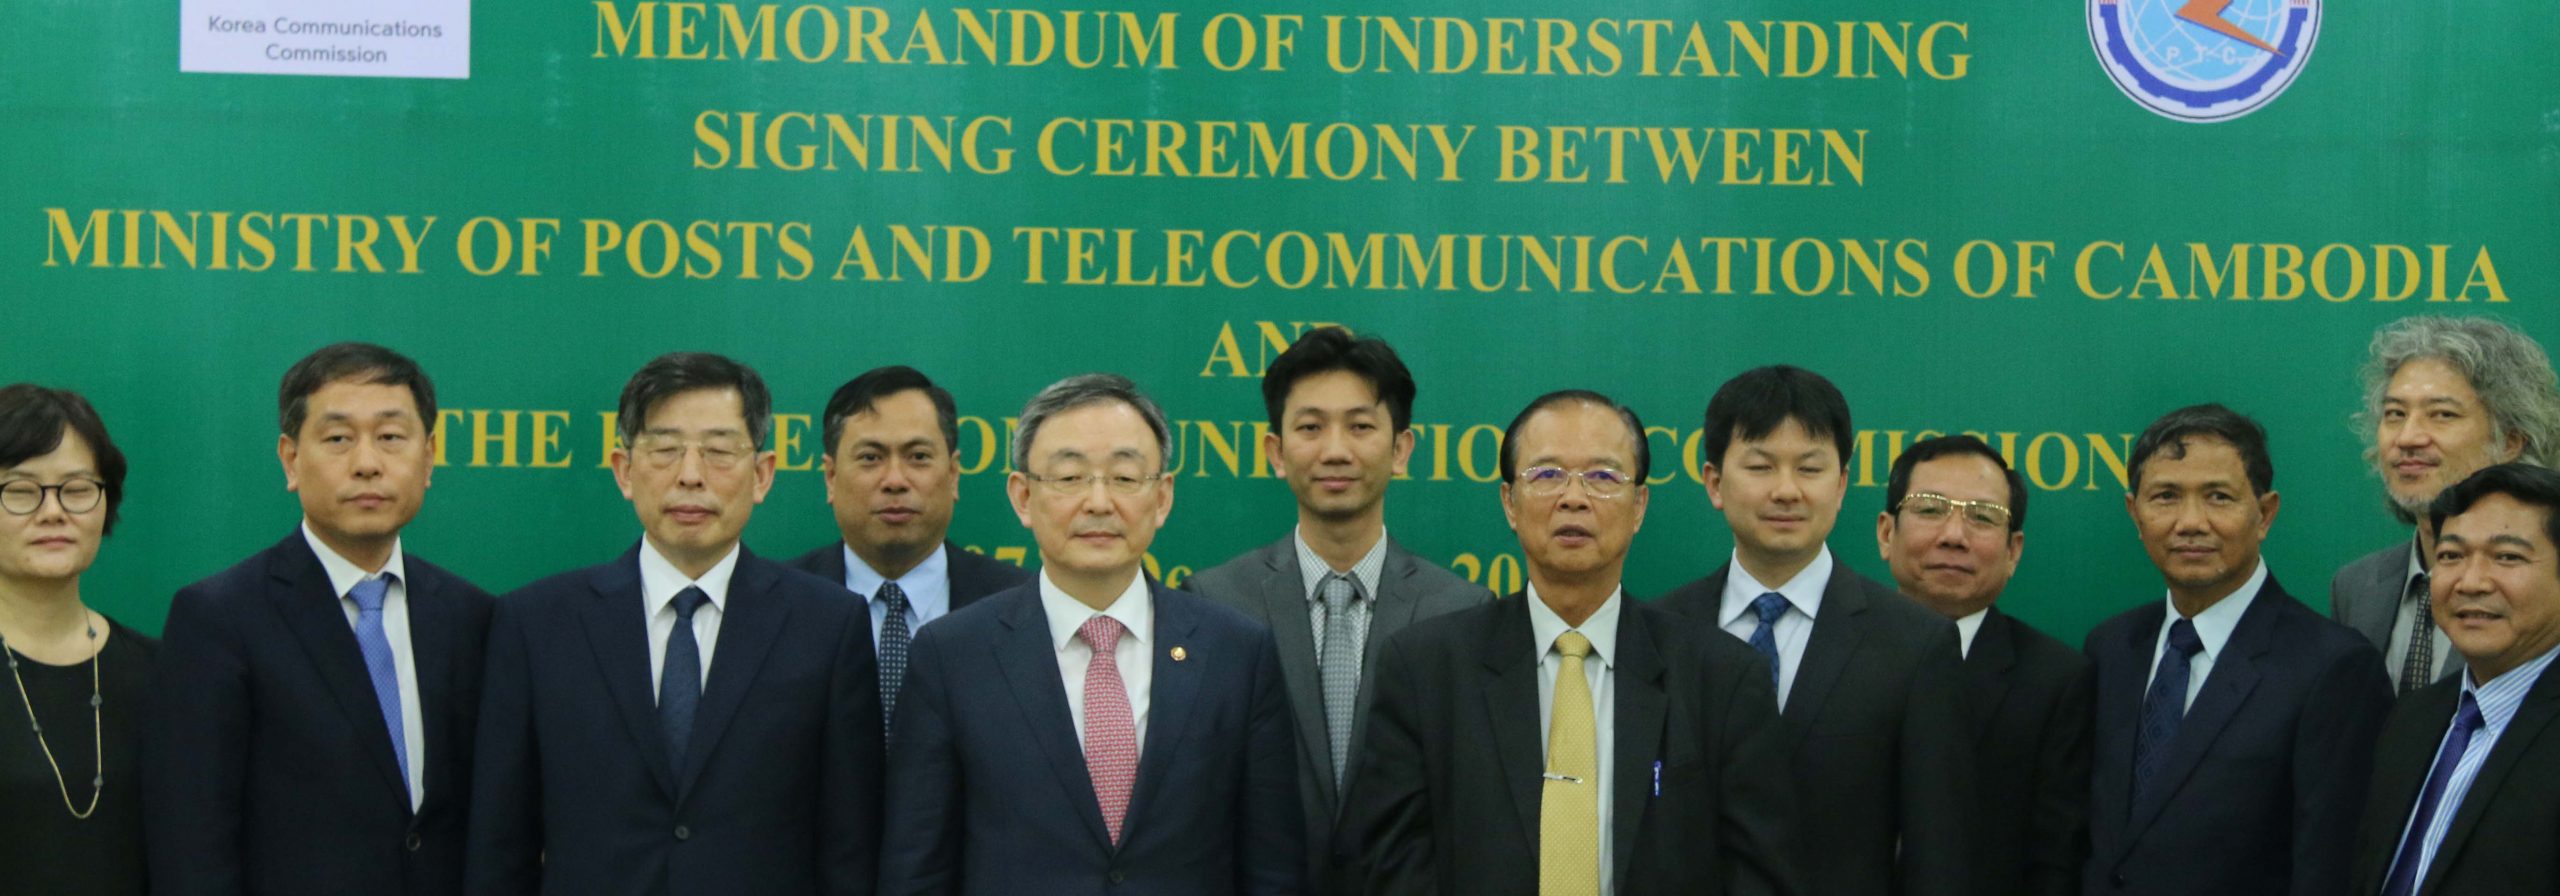 The Memorandum of Understanding Signing Ceremony between the MPTC with the Korea Communications Commission (KCC)